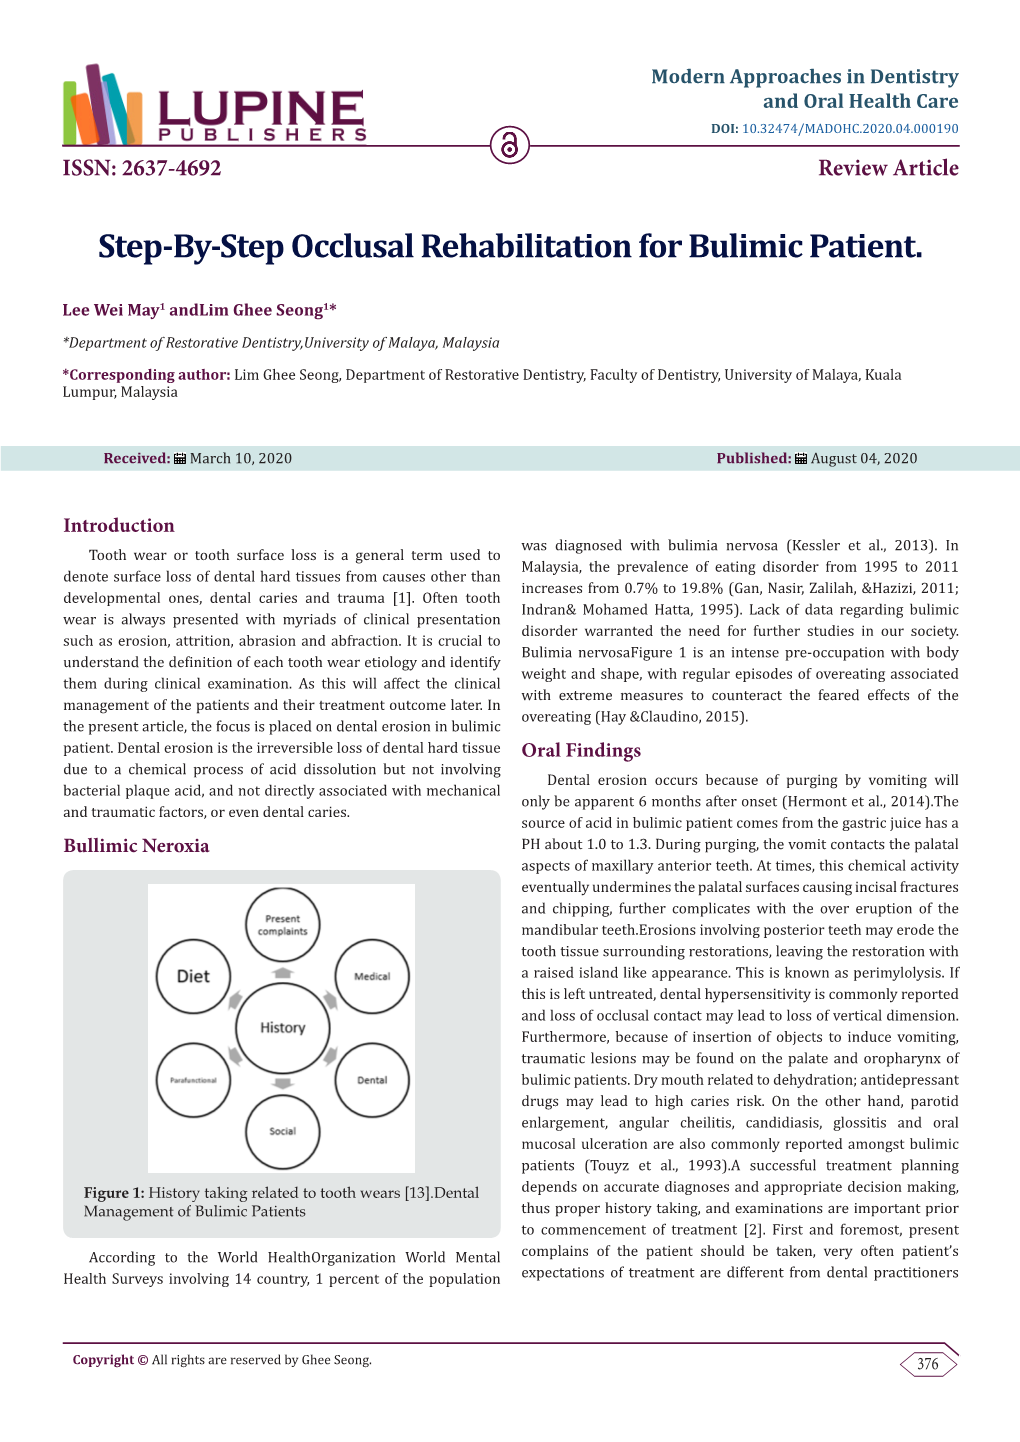 Step-By-Step Occlusal Rehabilitation for Bulimic Patient